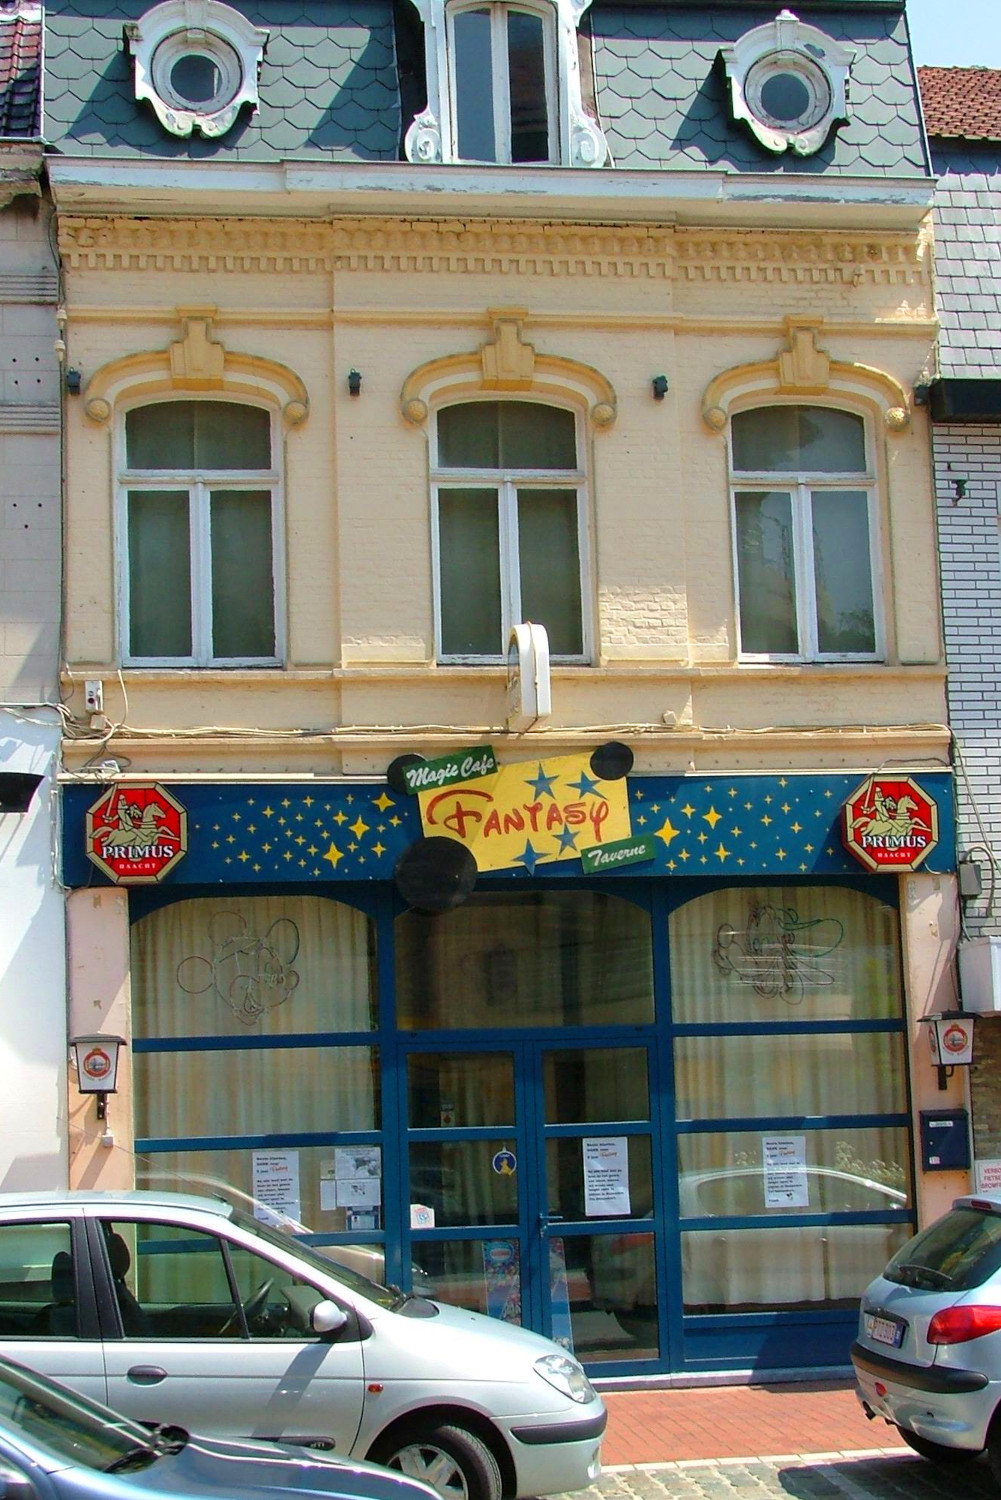 The brightly colored facade of the café